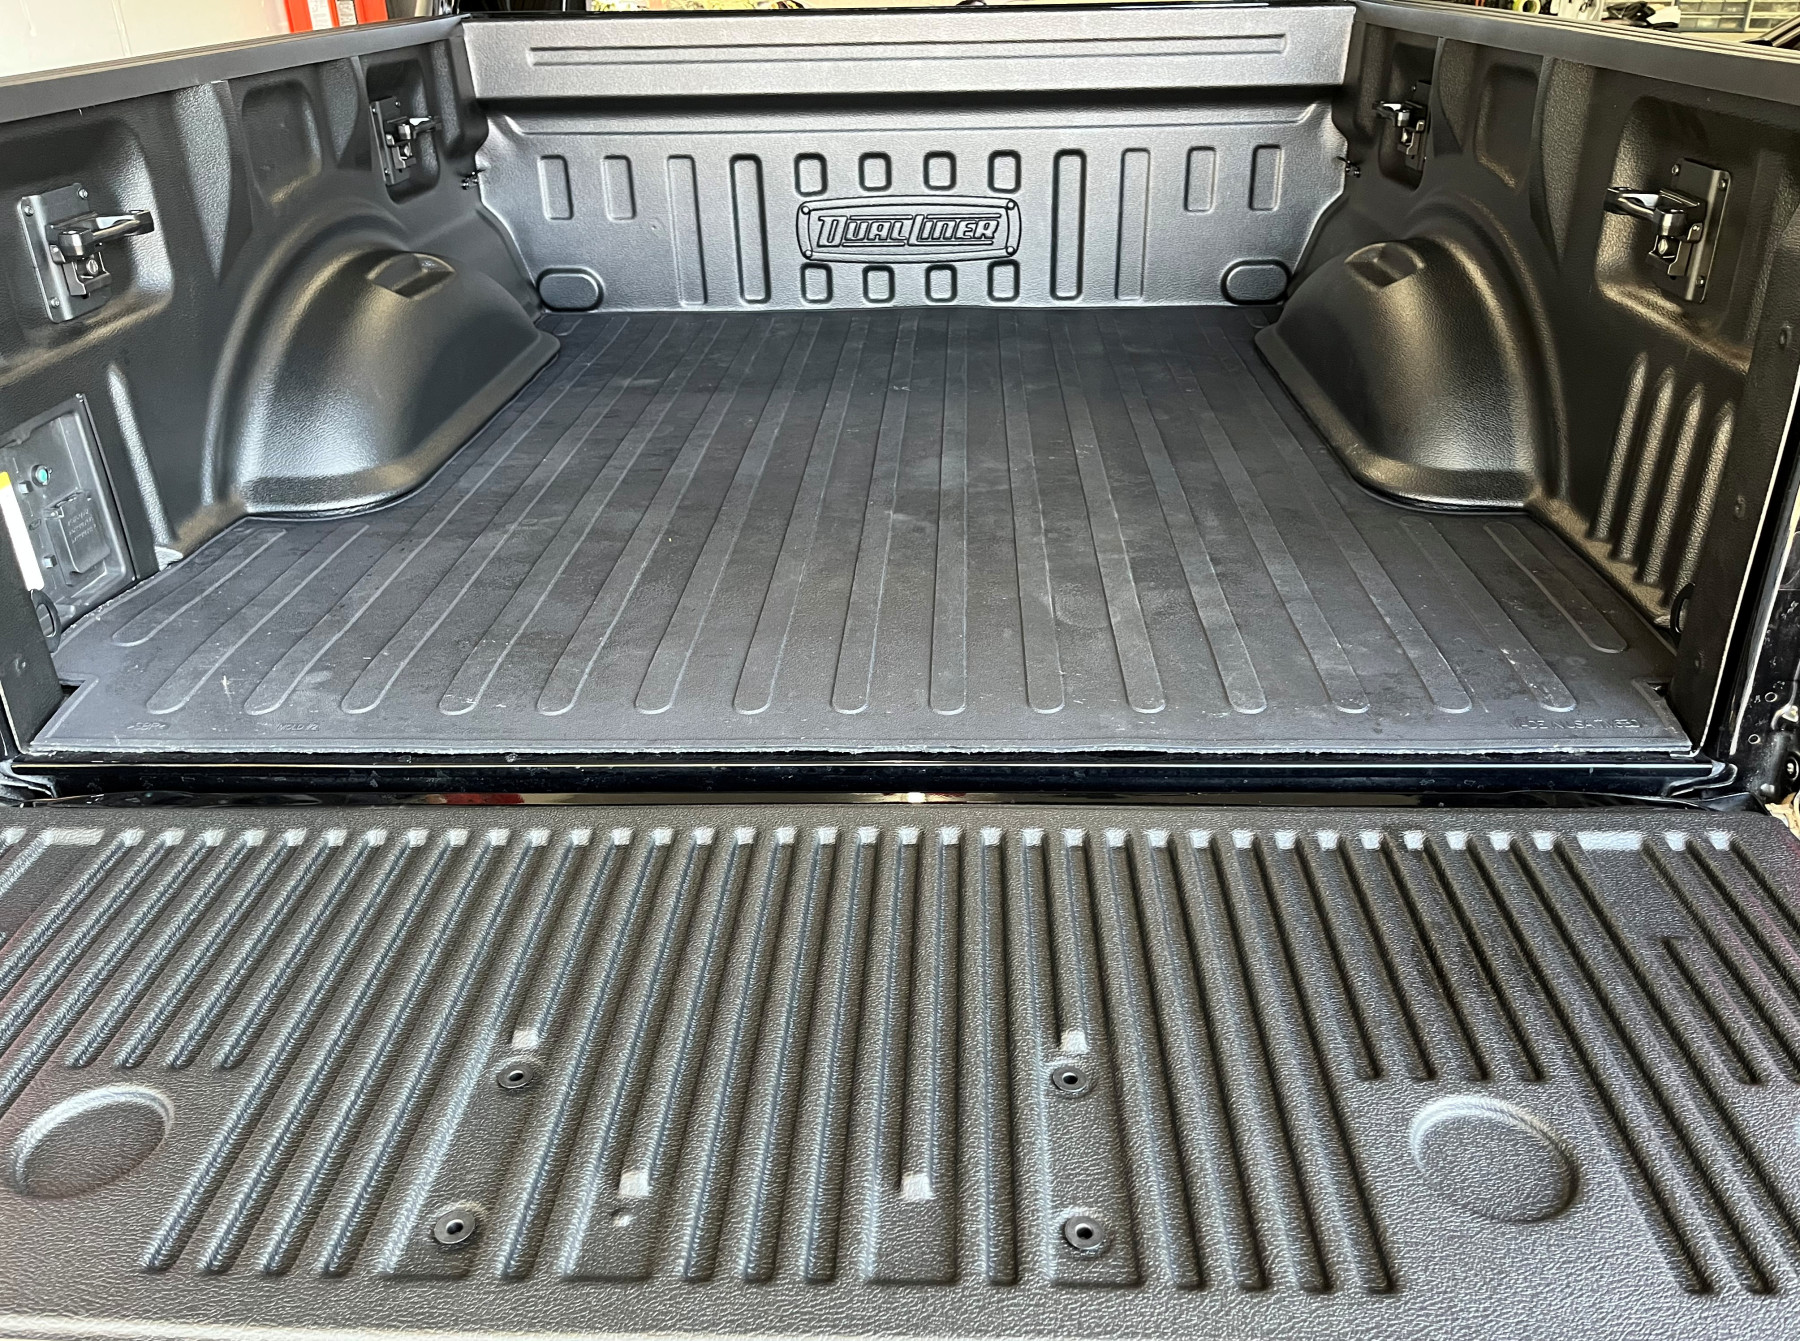 Standard Spray-In Bed Liner at Pittsburgh Protective Coatings!